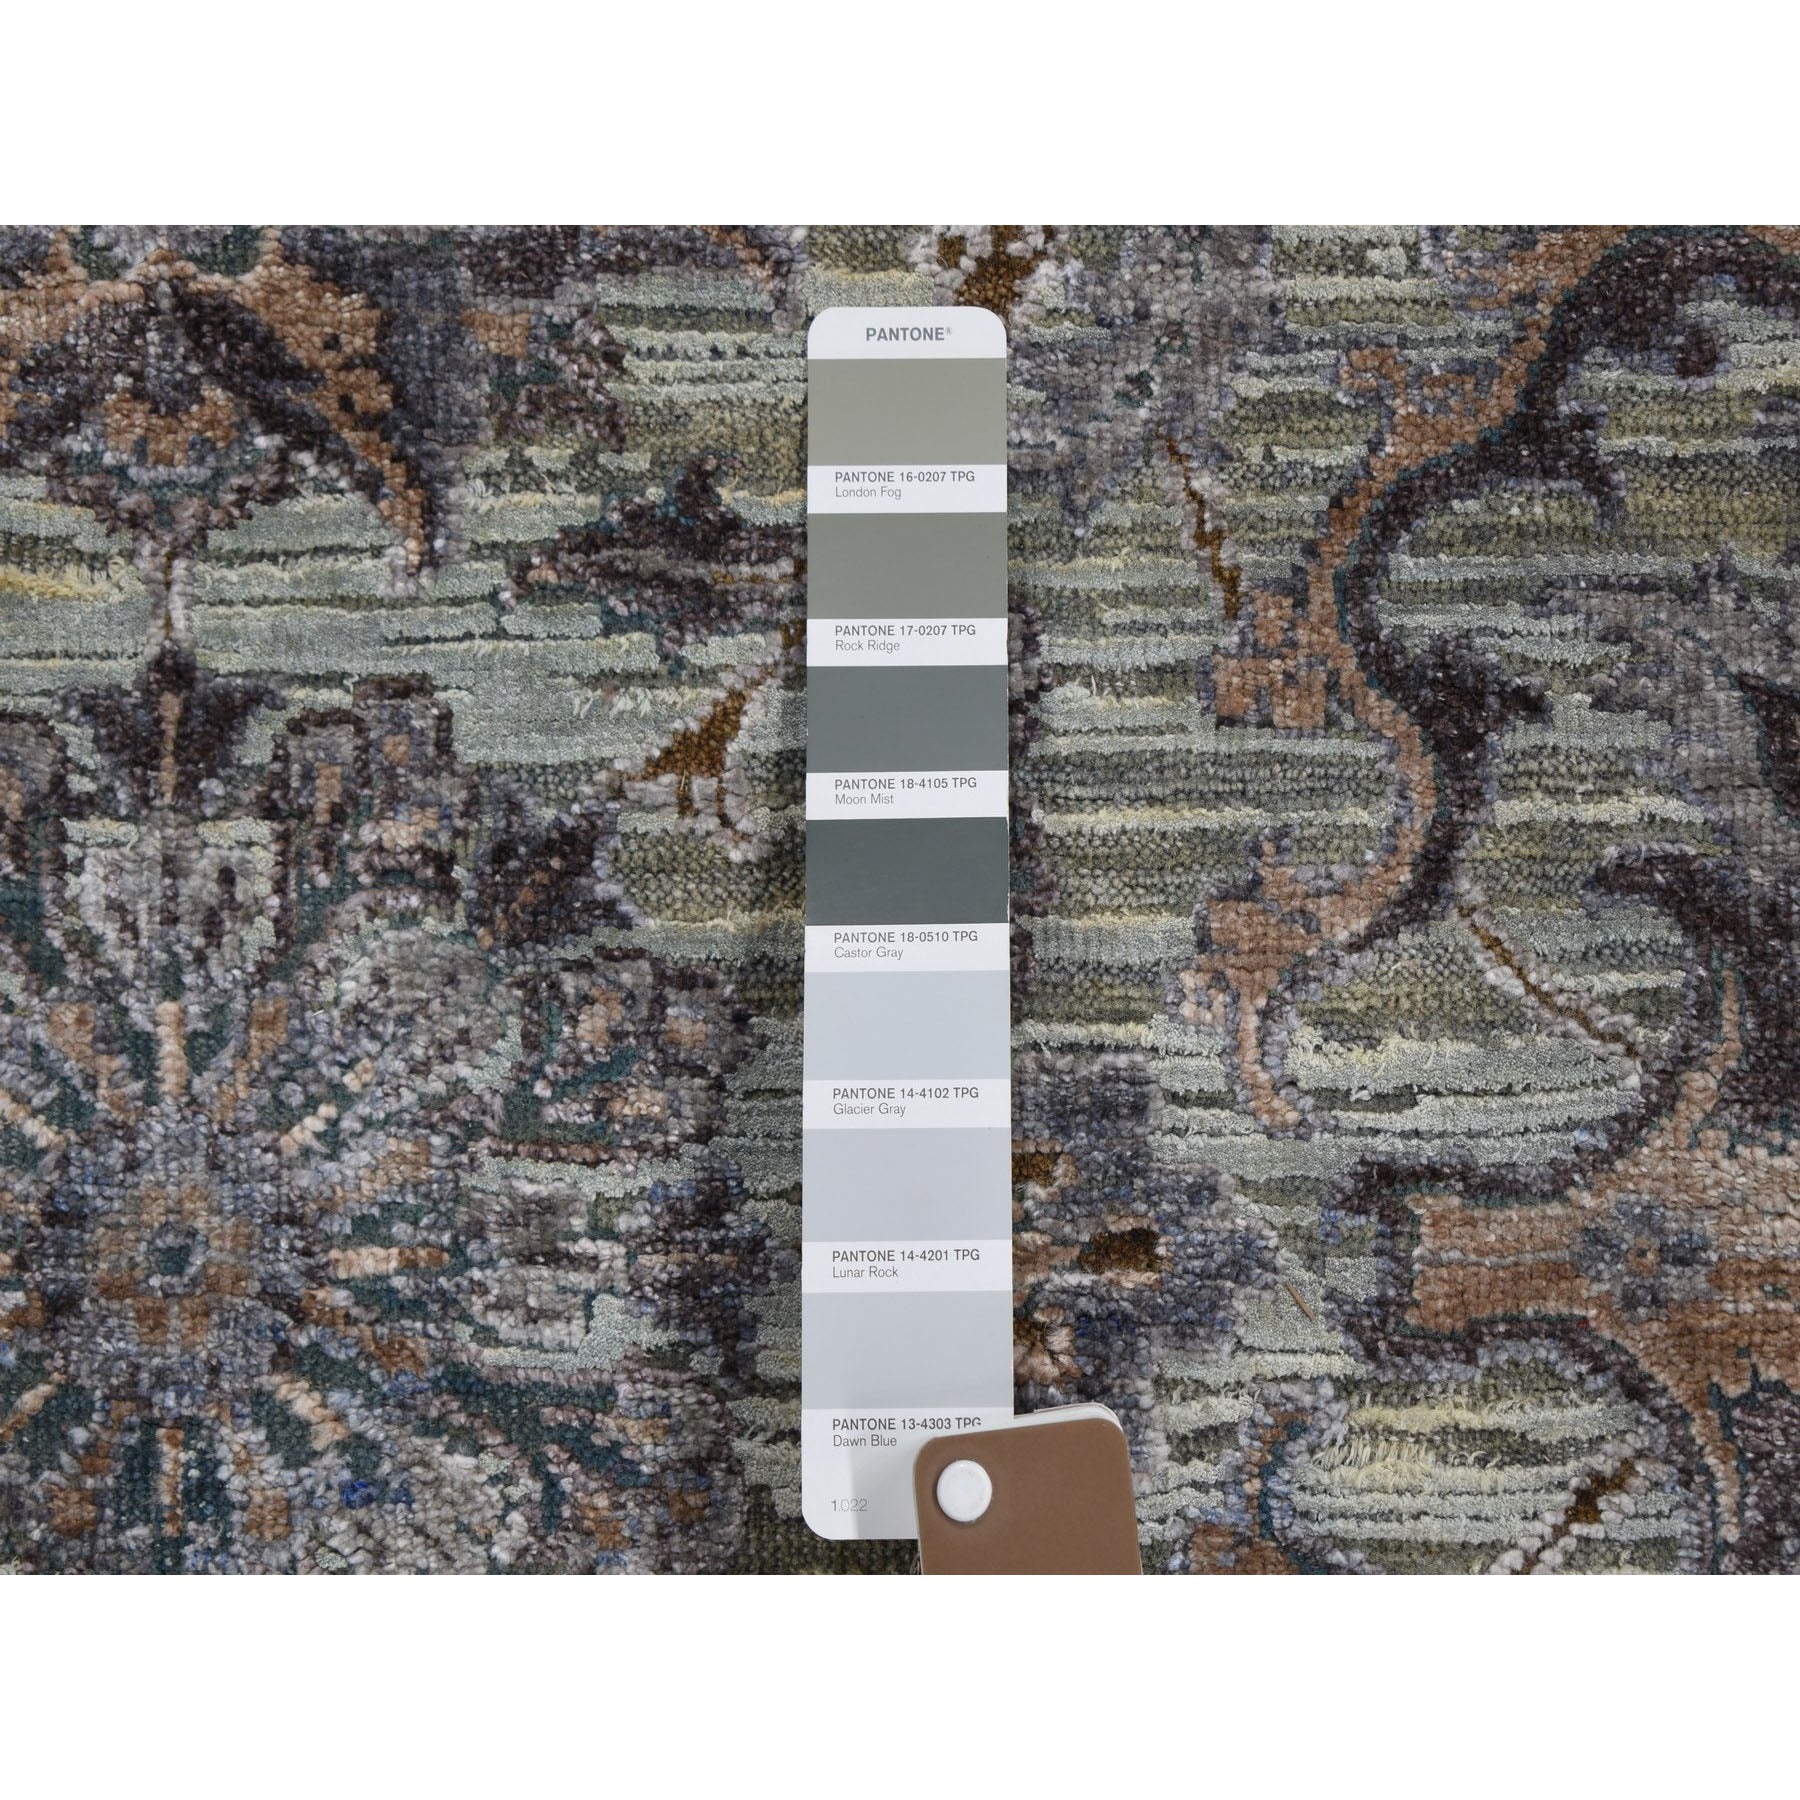 Hand Knotted Transitional Area Rug > Design# CCSR59164 > Size: 6'-0" x 9'-1"